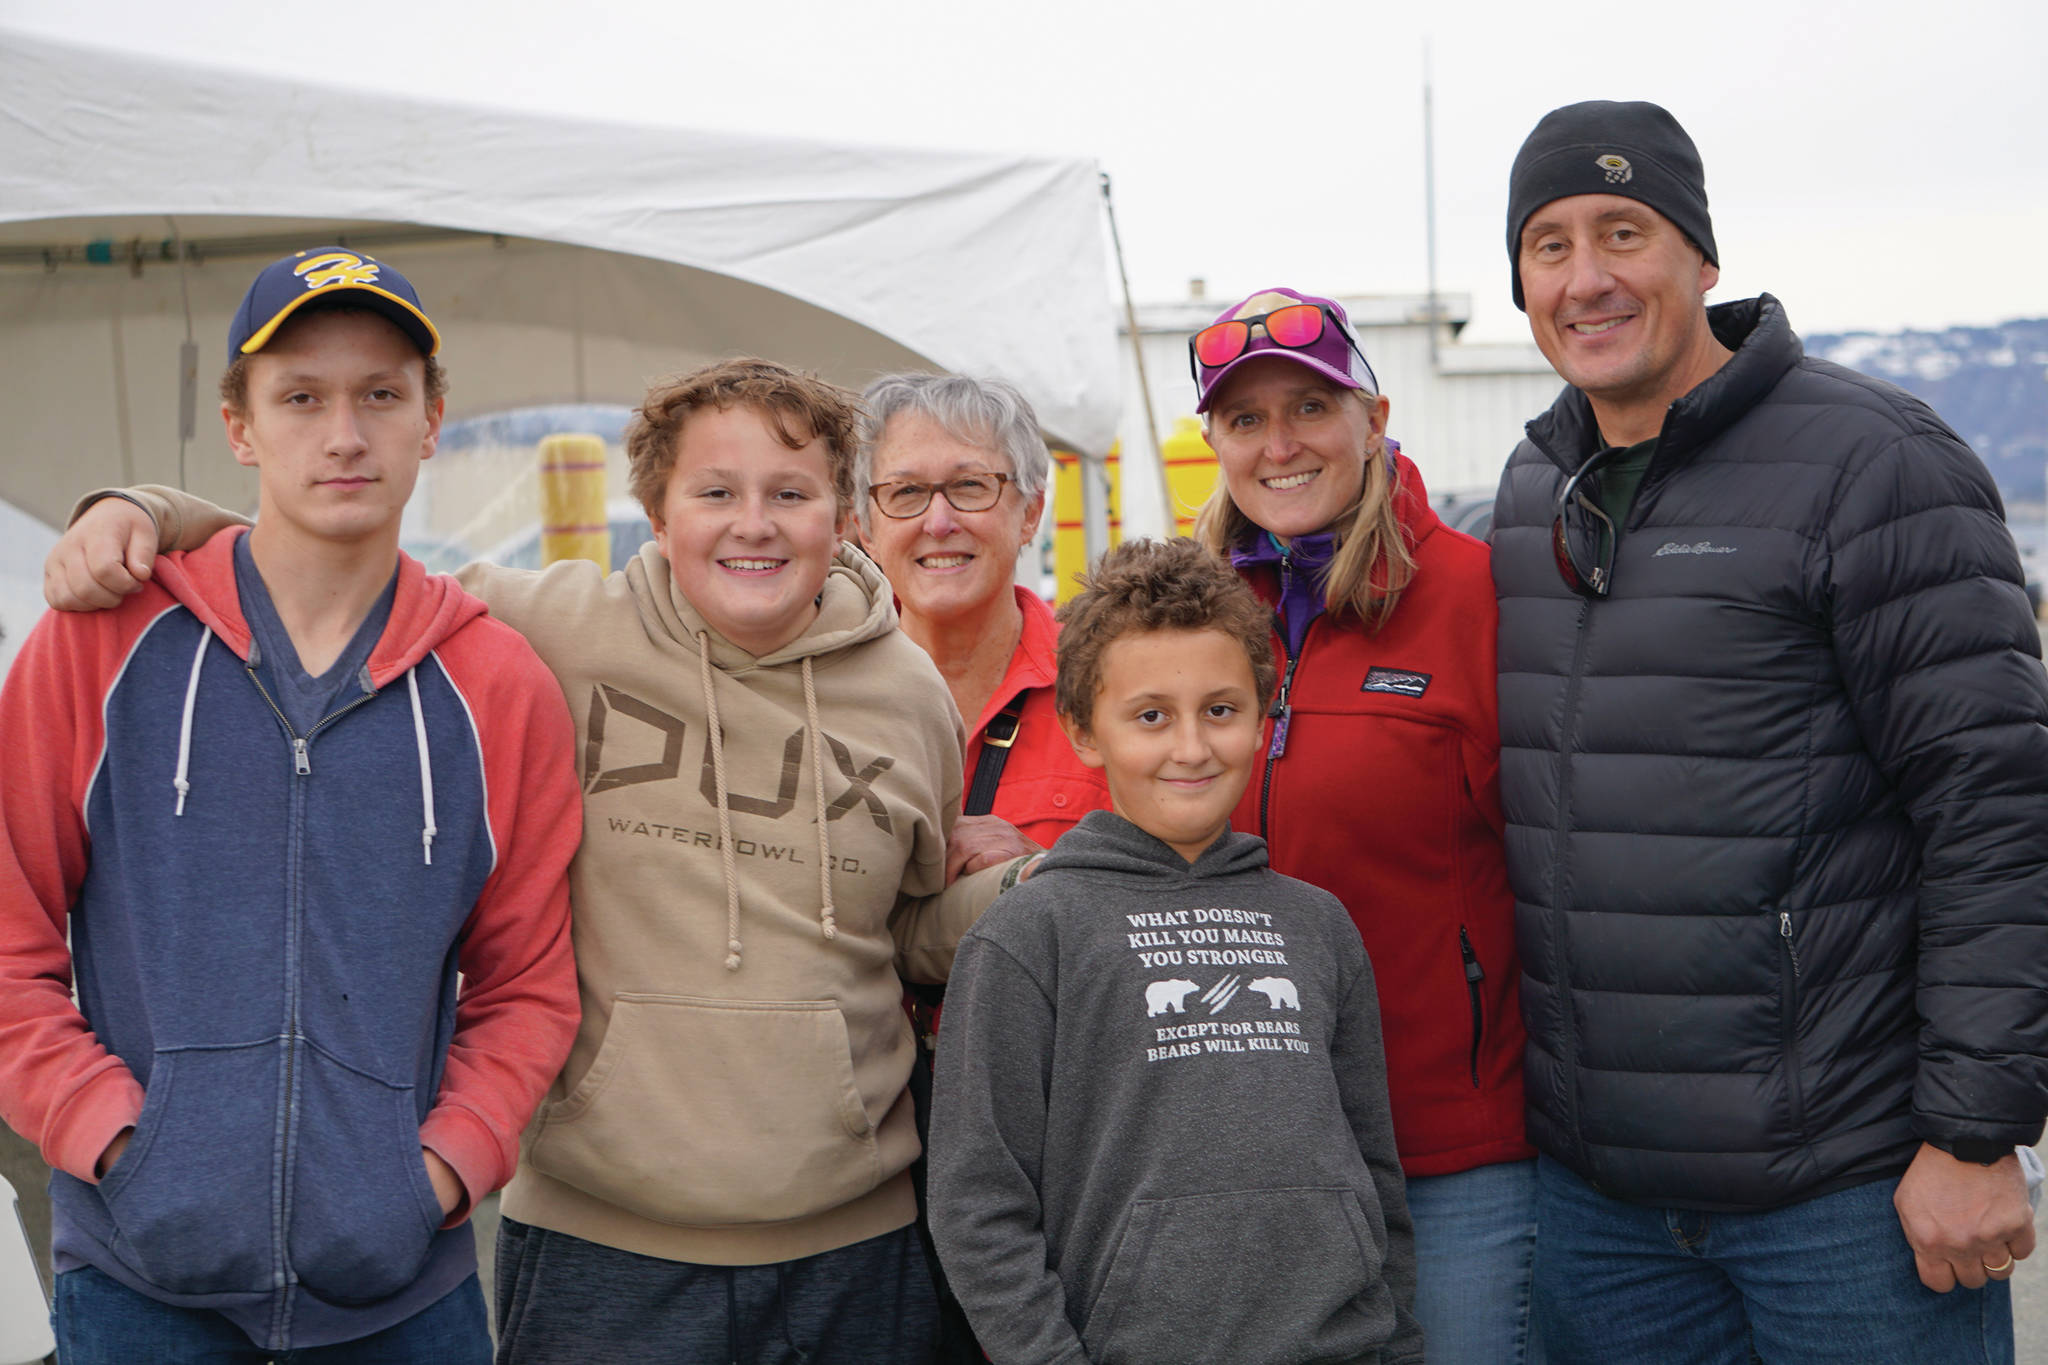 Andrew Marley, the 2021 Homer Winter King Salmon Tournament winner, fourth from left, poses with his family on Saturday, April 17, 2021, on the Homer Spit in Homer, Alaska. Andrew won the tournament with a 25.62-pound white king salmon fishing on the Fly Dough. From left to right are Zach Marley, Weston Marley, grandmother Susan Oesting, Andrew Marley, Erica Marley, and Capt. Jay Marley. (Photo by MIchael Armstrong/Homer News)